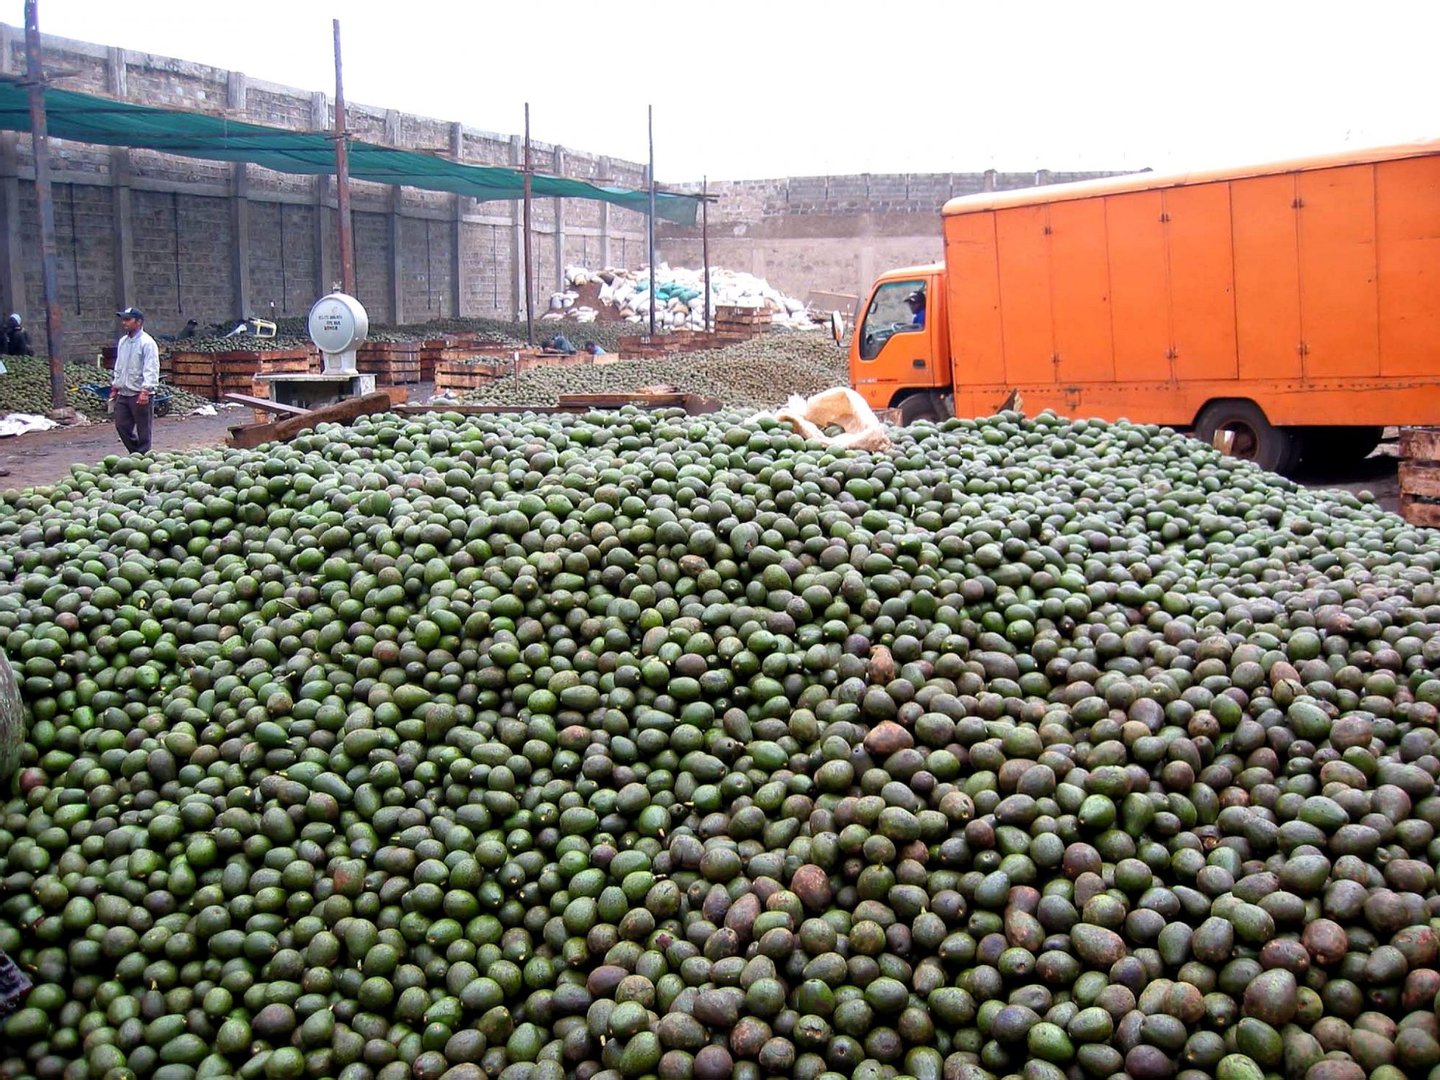 Oil will be extracted from avocados like these to be used in cos